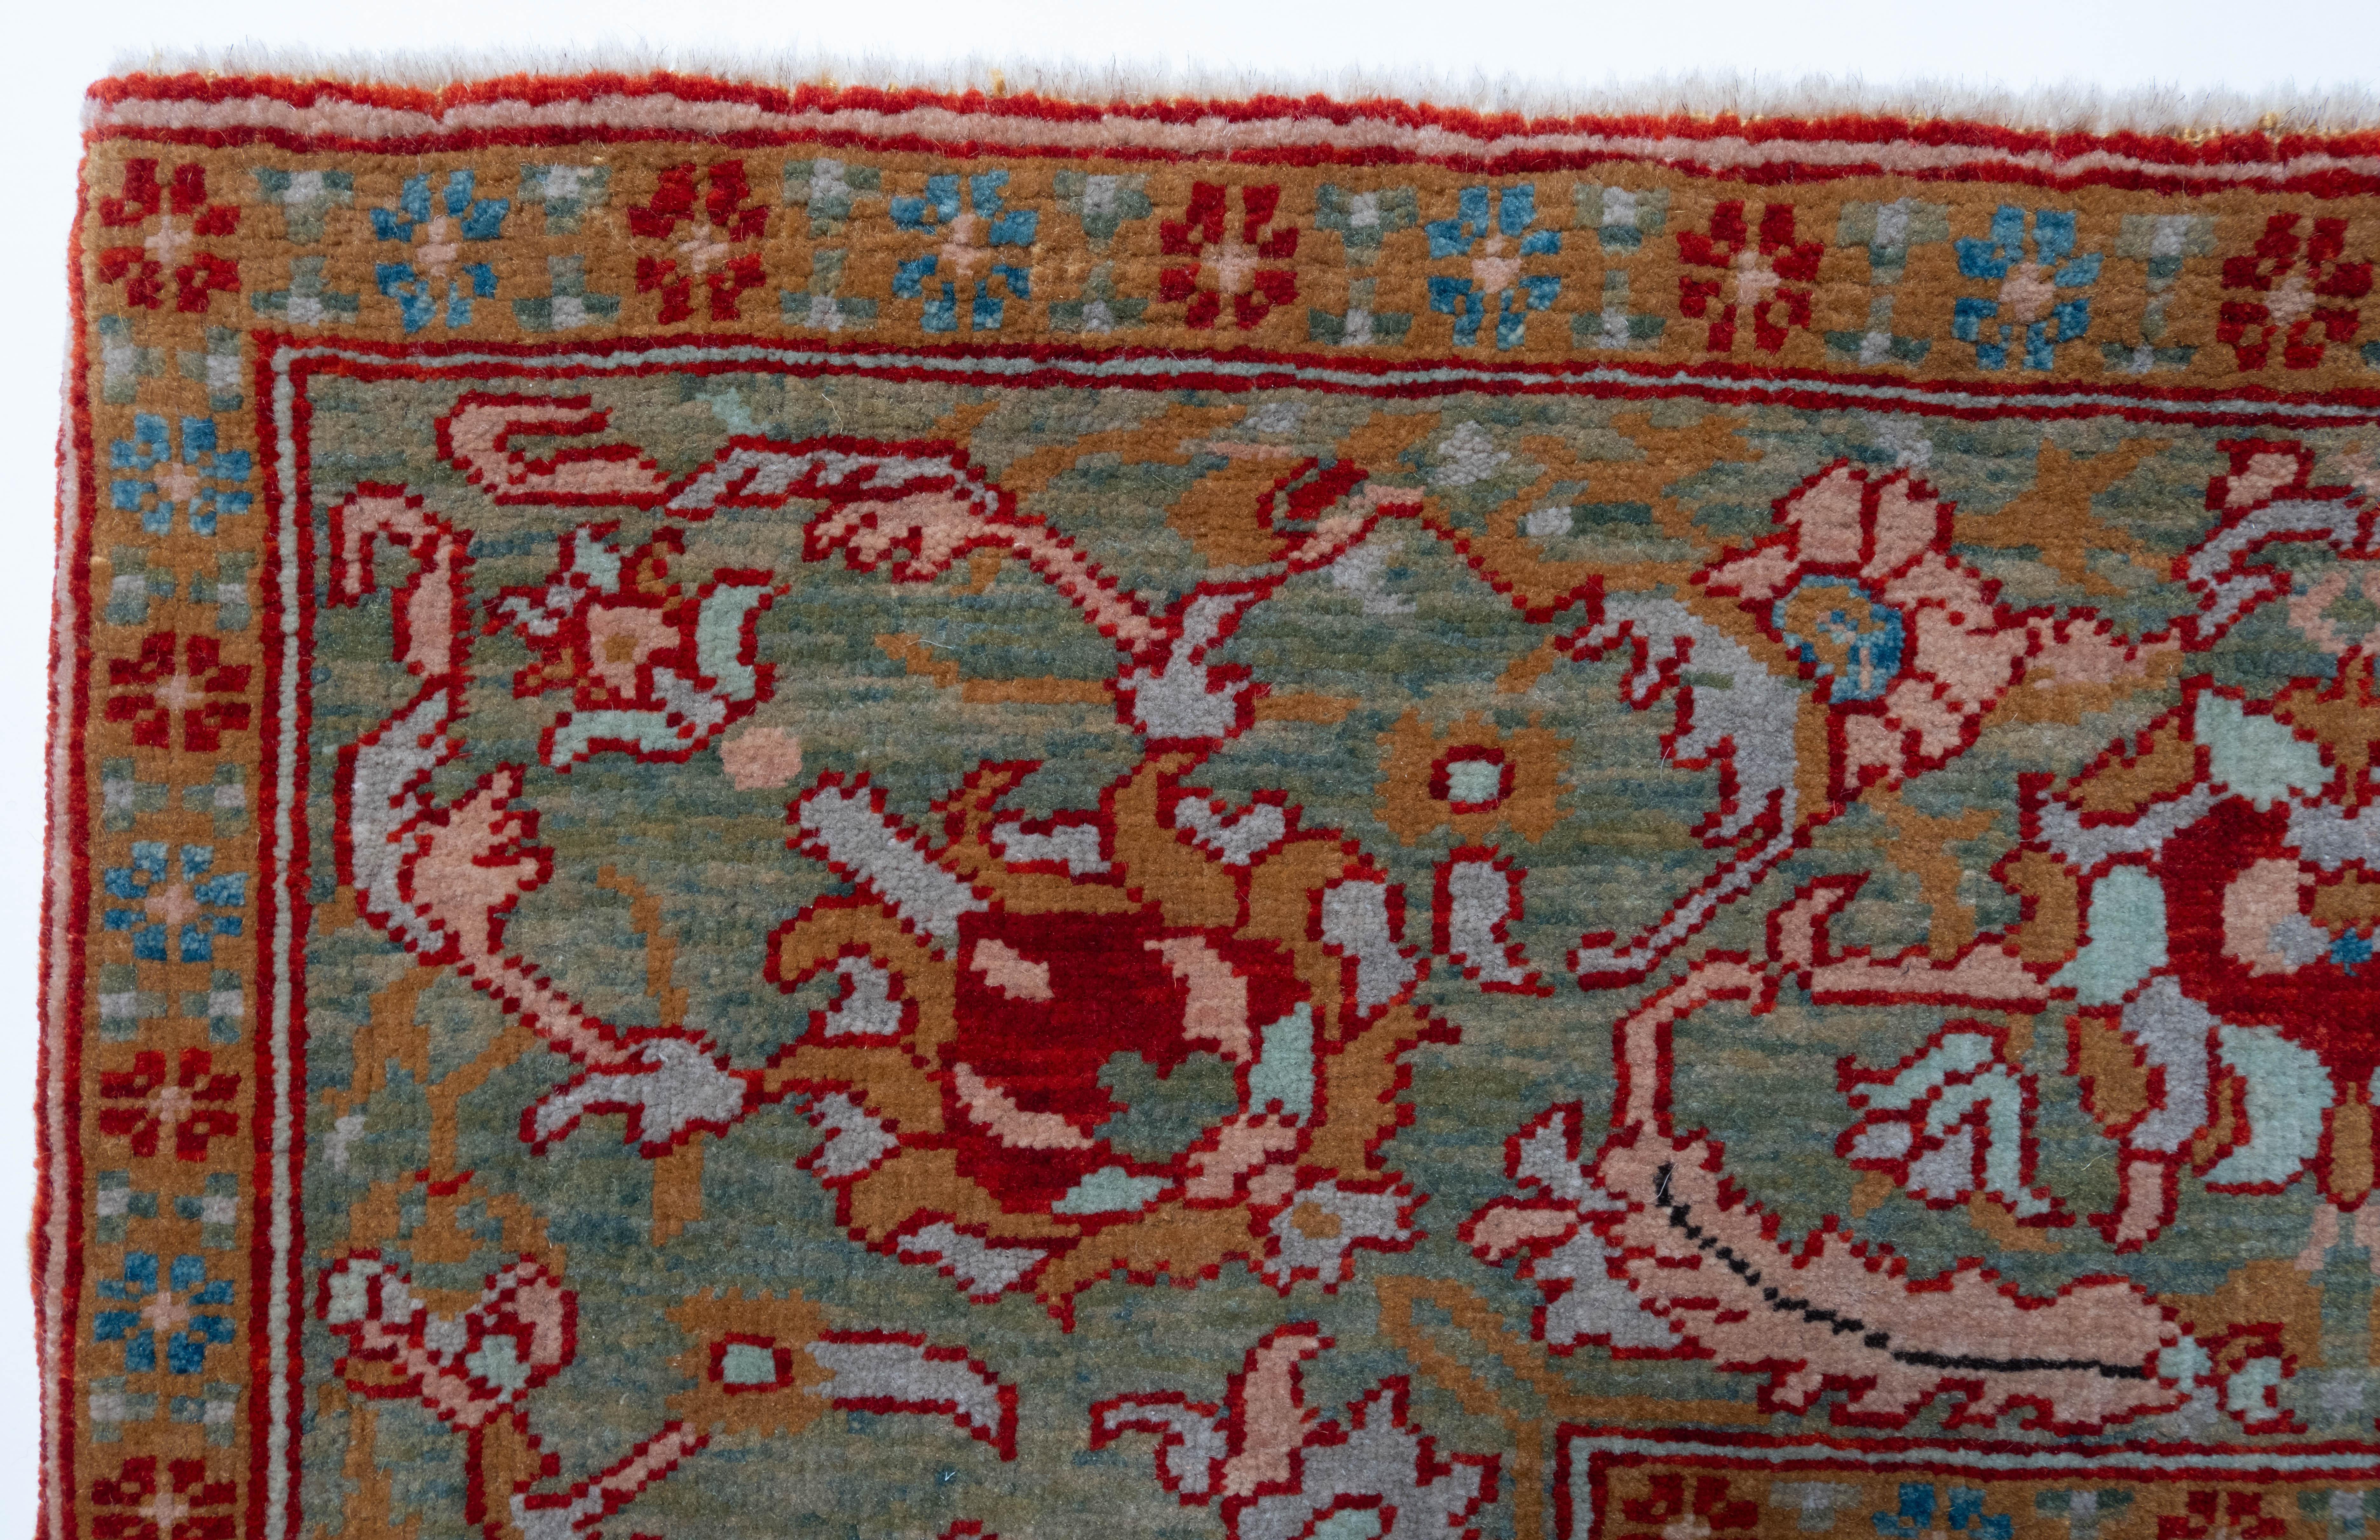 Turkish Court Manufactury Rugs were woven in the Egyptian workshops founded by Ottoman Empire in the 16th century. Those carpets were woven in Egypt, following the paper cartoons probably created in Istanbul and sent to Cairo at that time. The